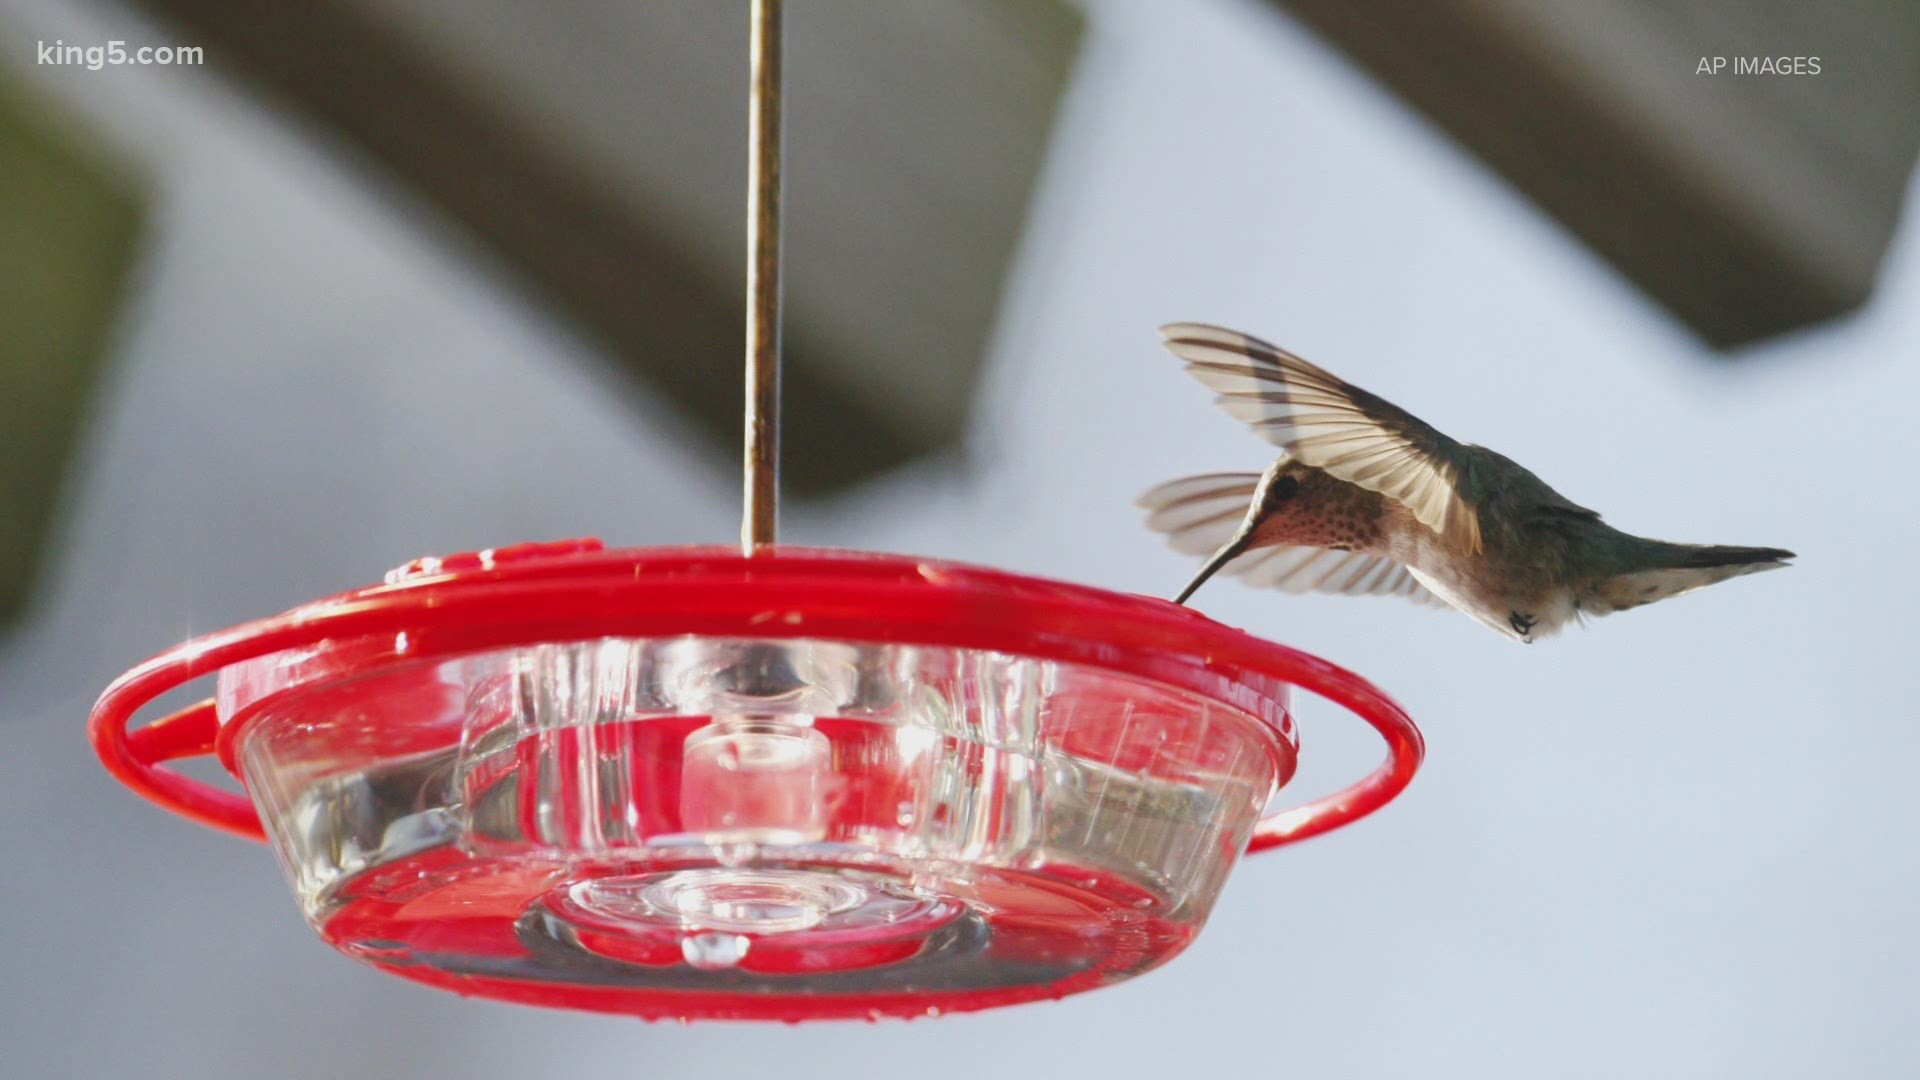 Experts say take down bird feeders to prevent the spread of disease, but a lot of people are worried about hummingbirds during the cold snap.